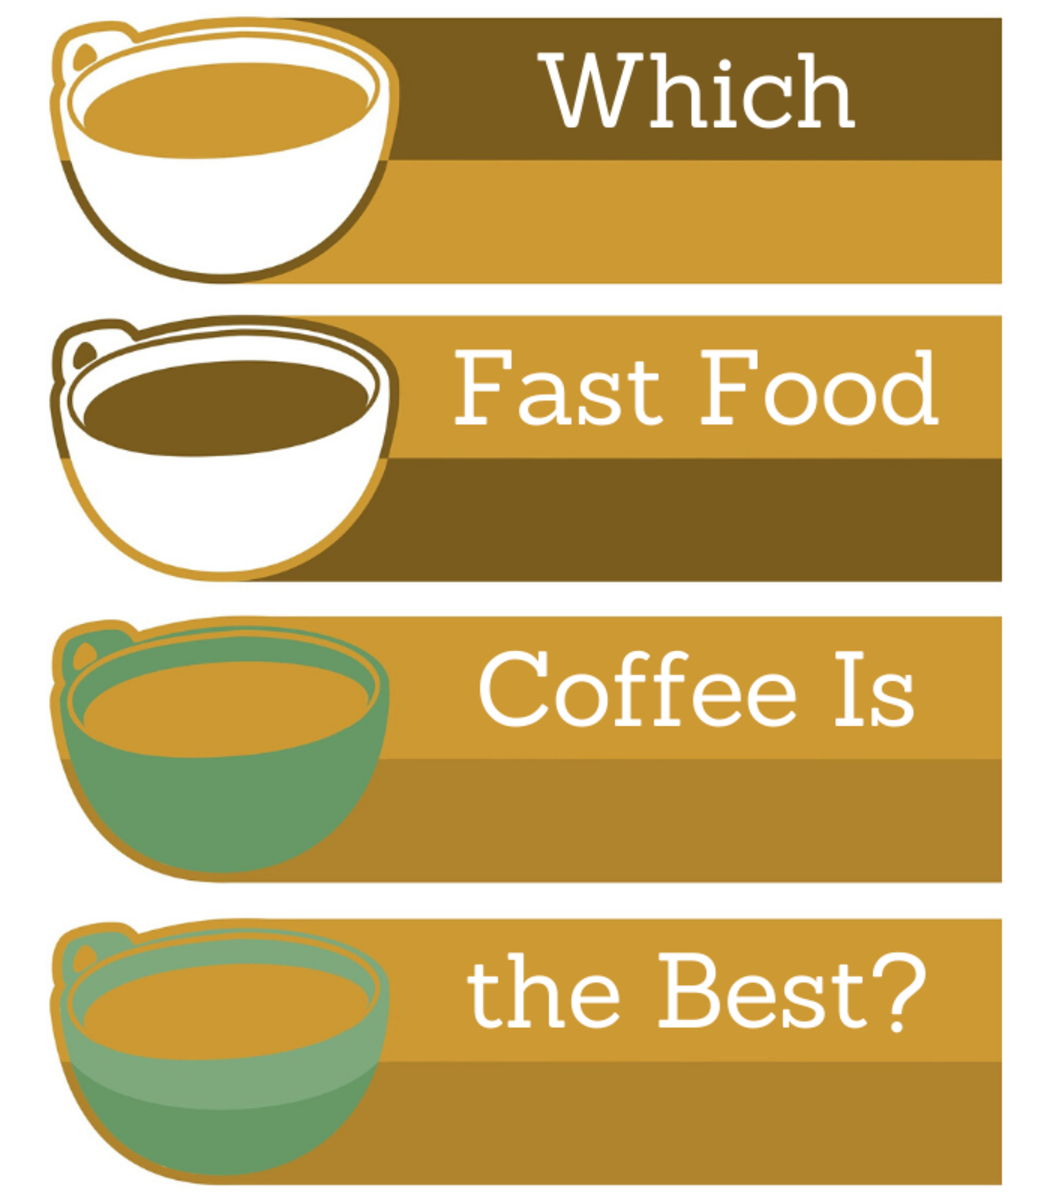 Which Fast Food Chain Has the Best Coffee?